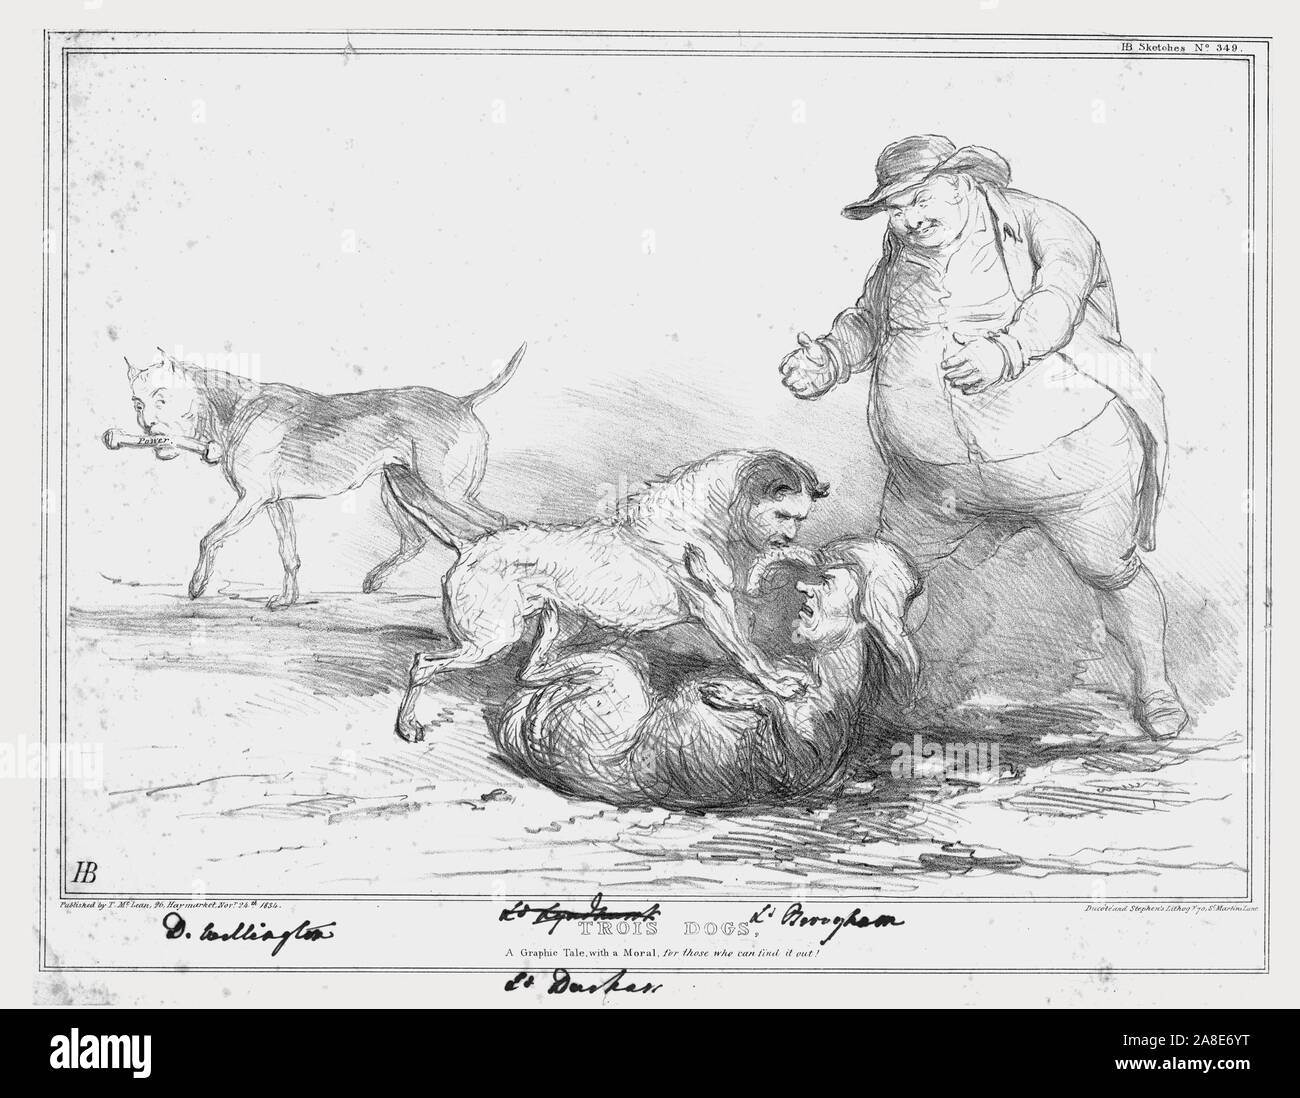 'Trios Dogs, A Graphic Tale, with a Moral, for those who can find it out!',1834. Prime minister Arthur Wellesley, 1st Duke of Wellington holding a bone labelled 'Power'; Governor-General of Canada John George Lambton, 1st Earl of Durham fighting with Lord Chancellor Henry Brougham, 1st Baron Brougham and Vaux; John Bull. Satirical cartoon on British politics by 'H.B.' (John Doyle). [Thomas McLean, London, 1834] Stock Photo